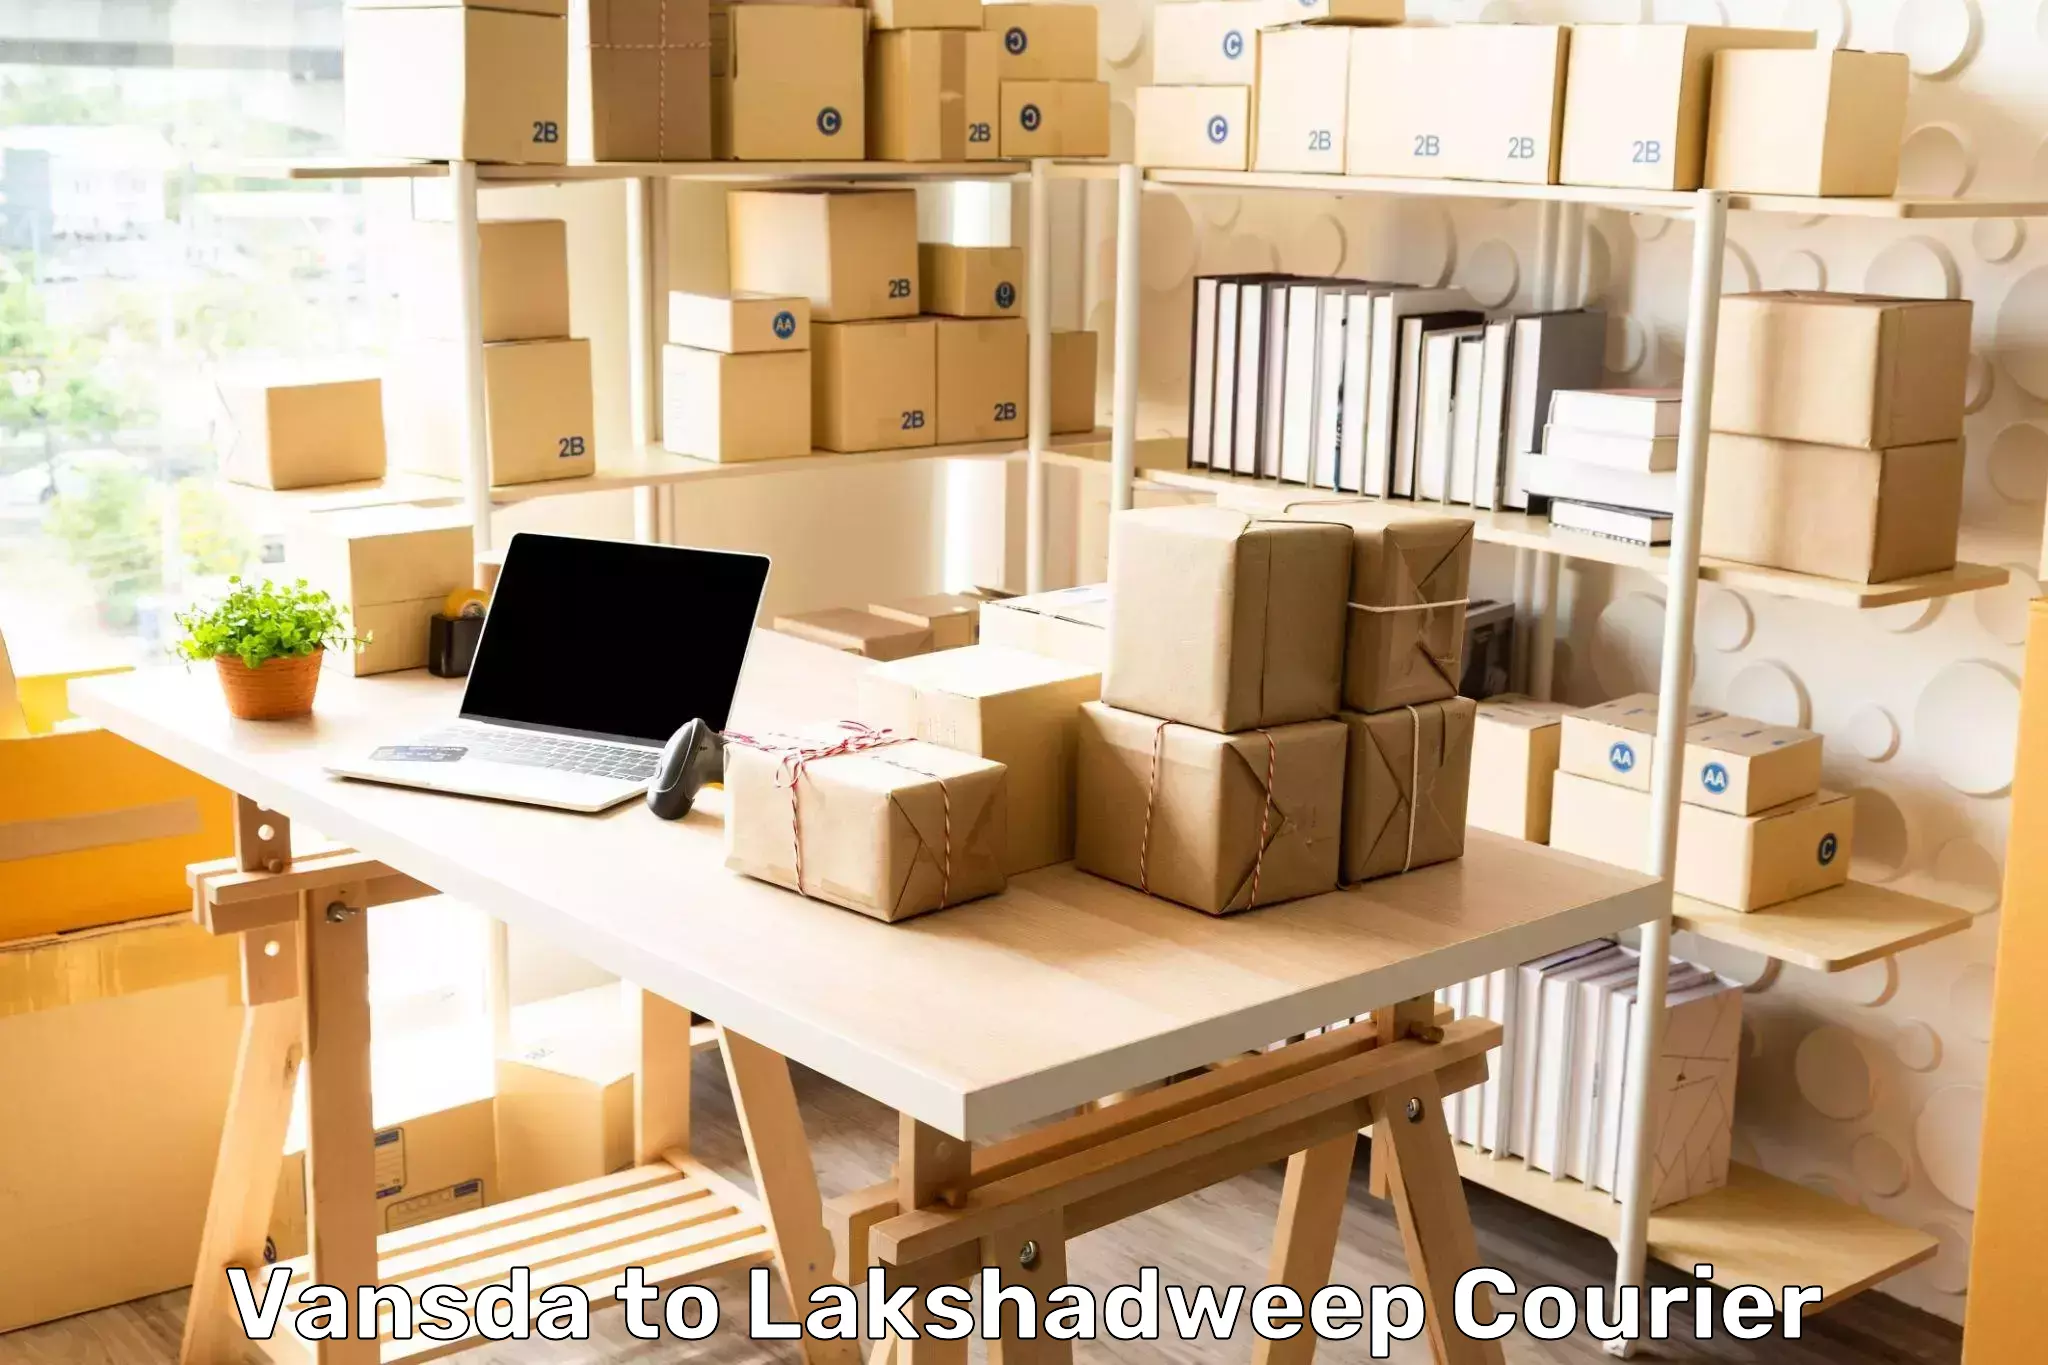 Residential courier service Vansda to Lakshadweep